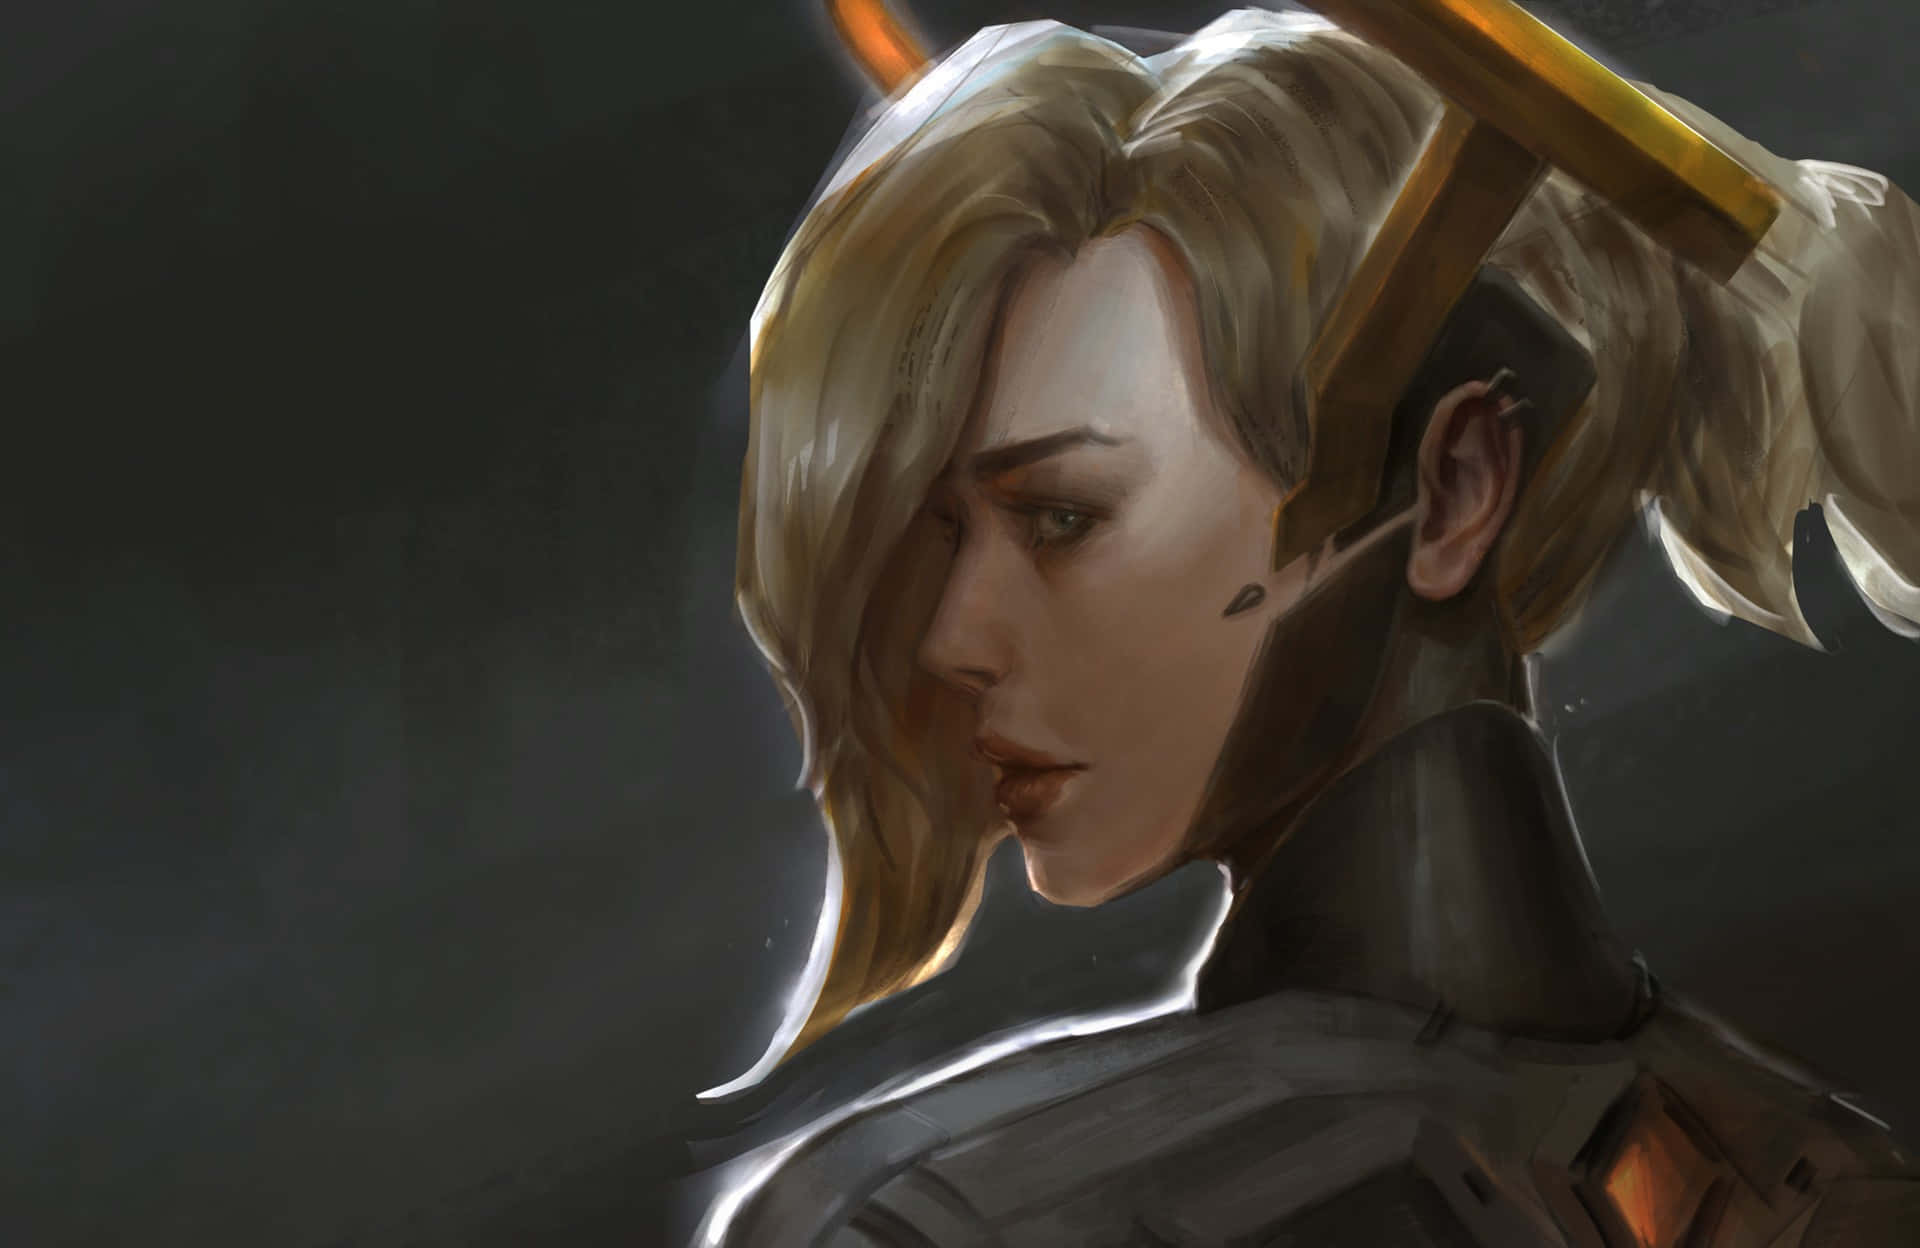 Soaring High with Overwatch's Mercy Wallpaper